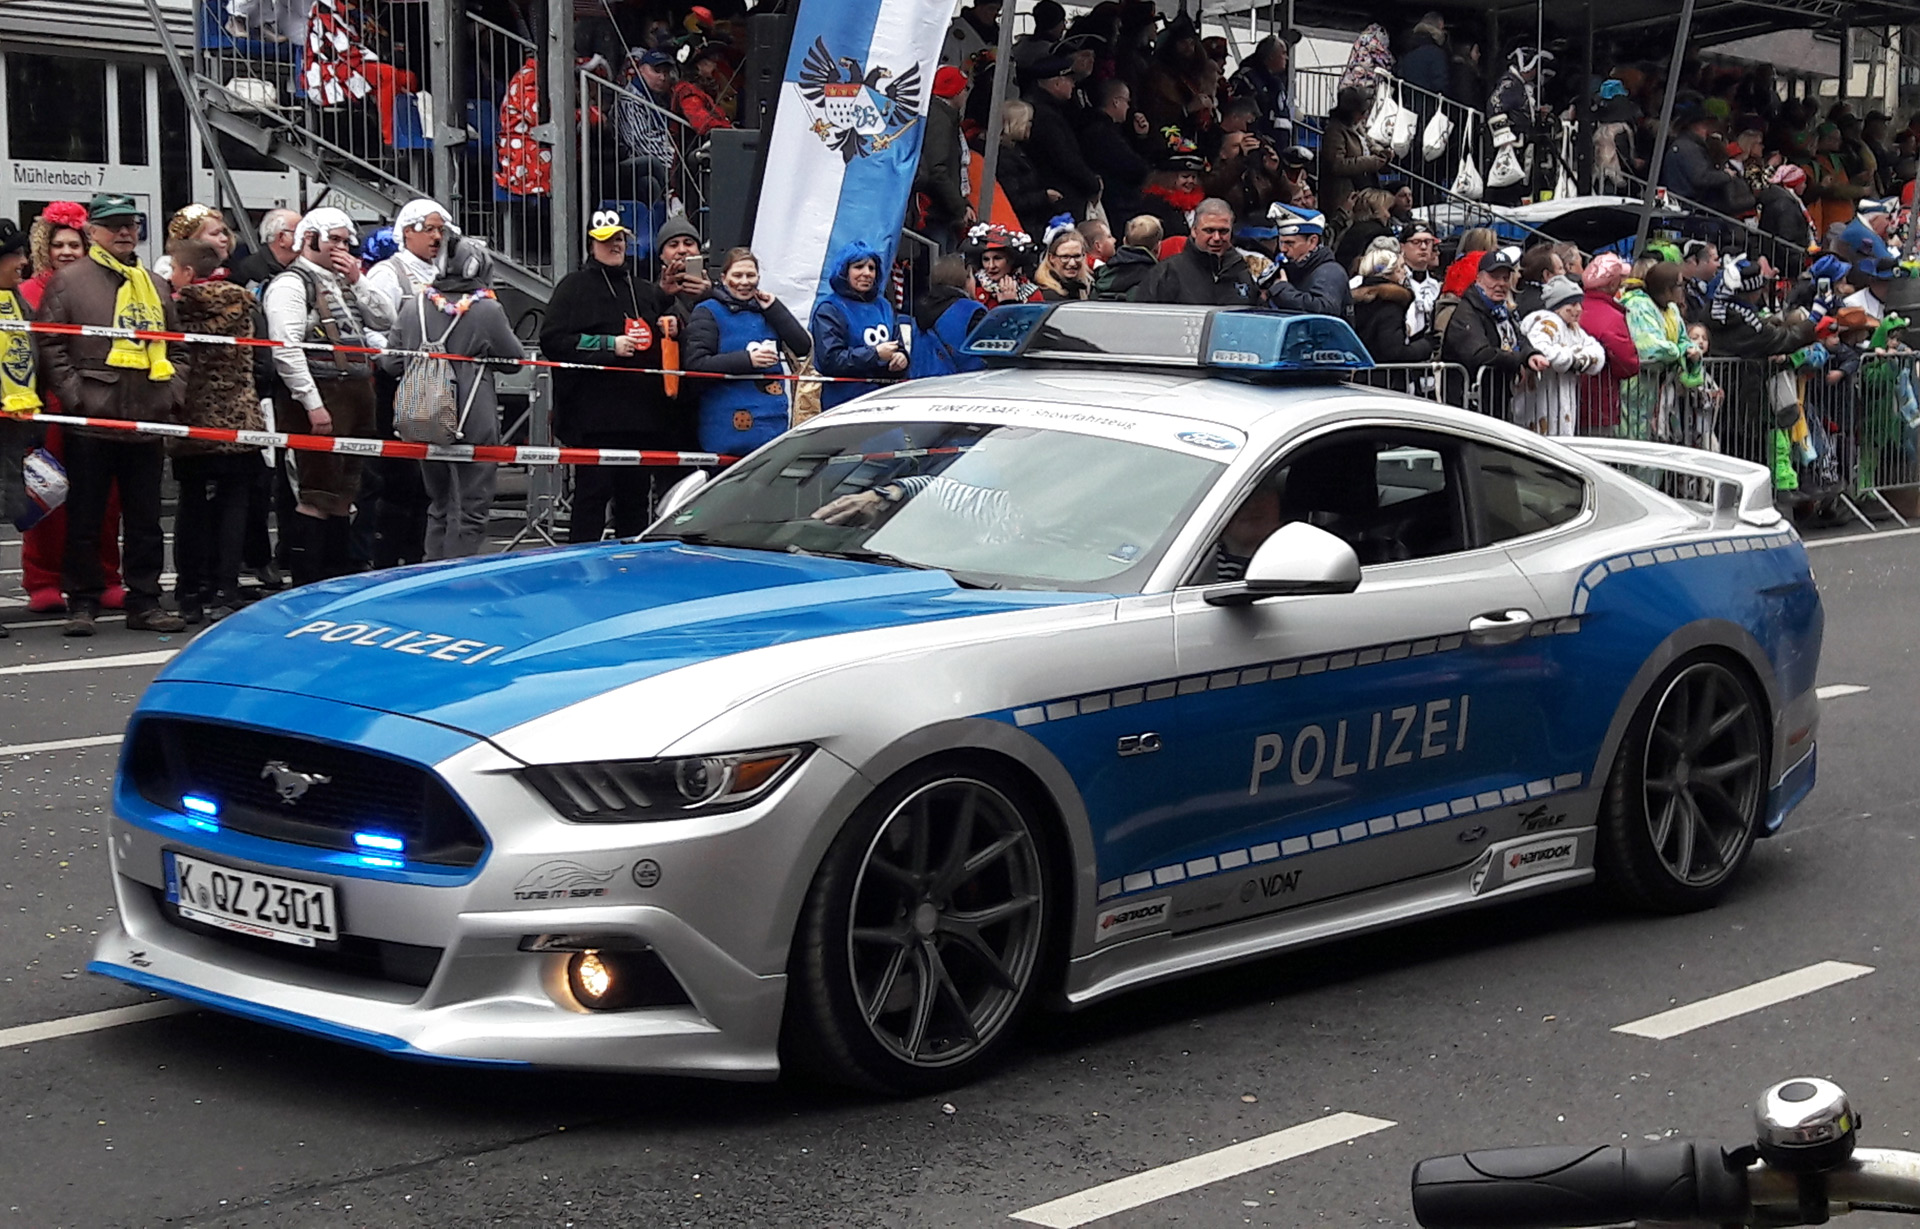 Ford Mustang police car leads 2017 Cologne Carnival parade